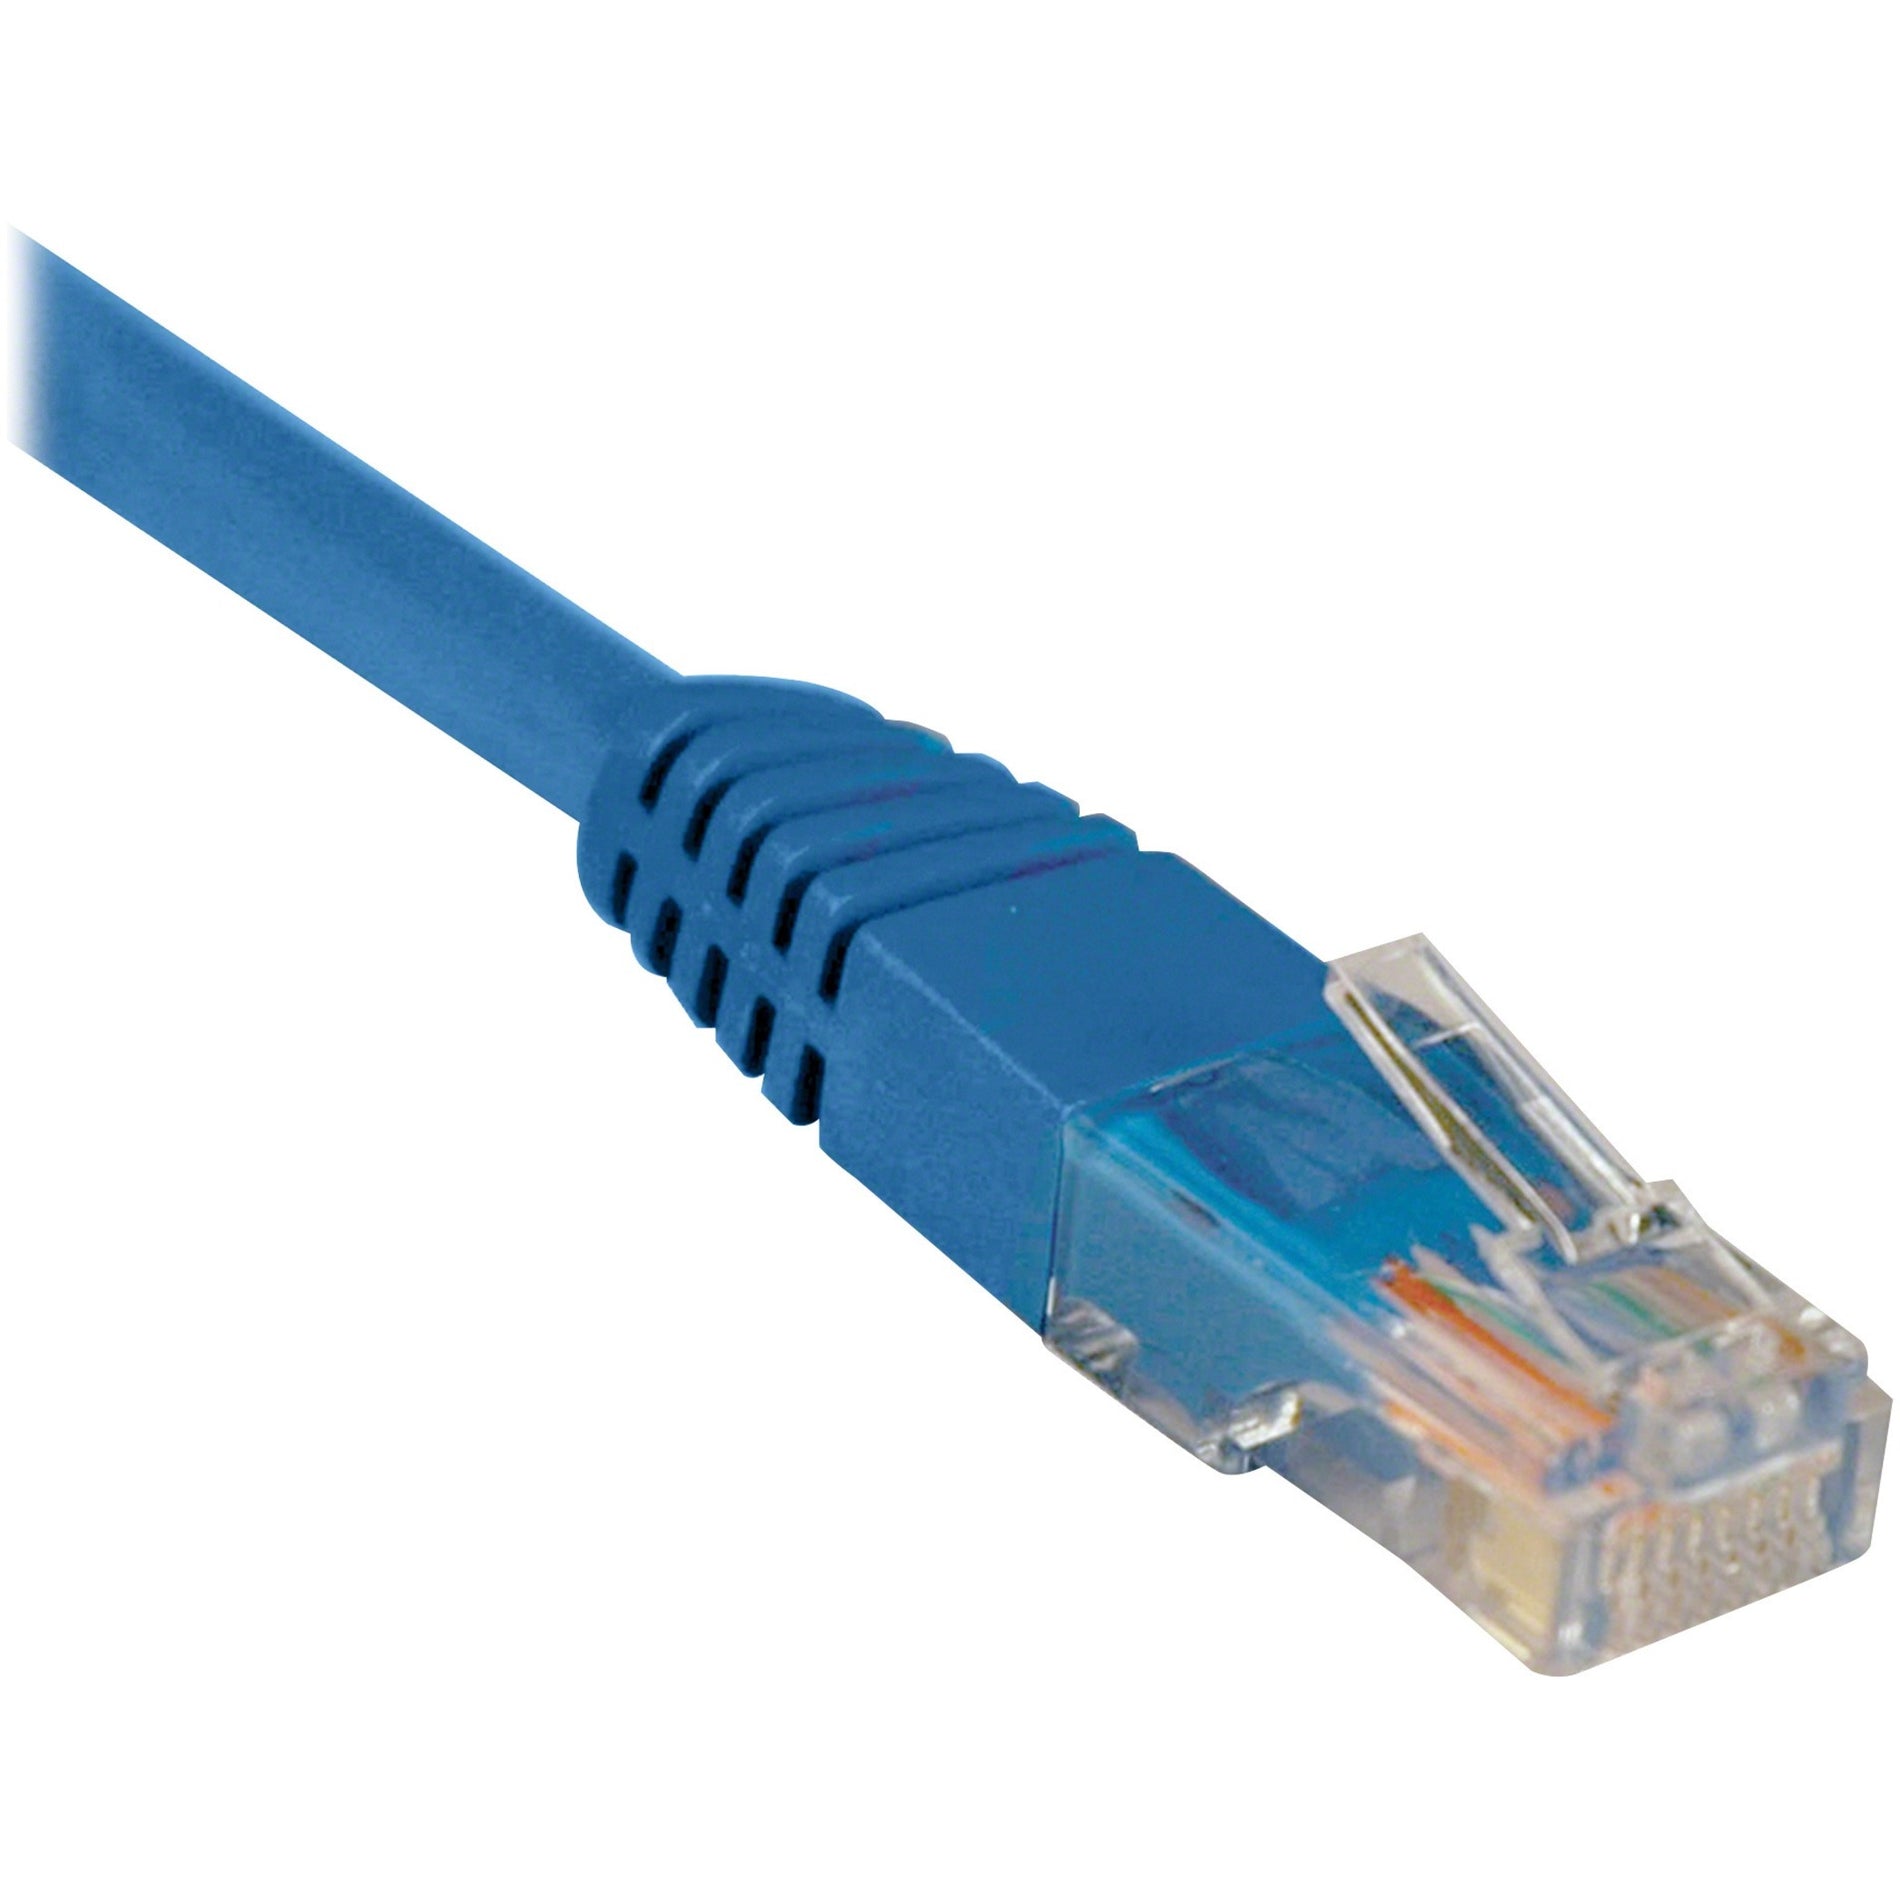 Tripp Lite N002-025-BL Cat5e Molded Patch Cable, 25ft, Blue - High-Speed Ethernet Cable for Home and Office Networking